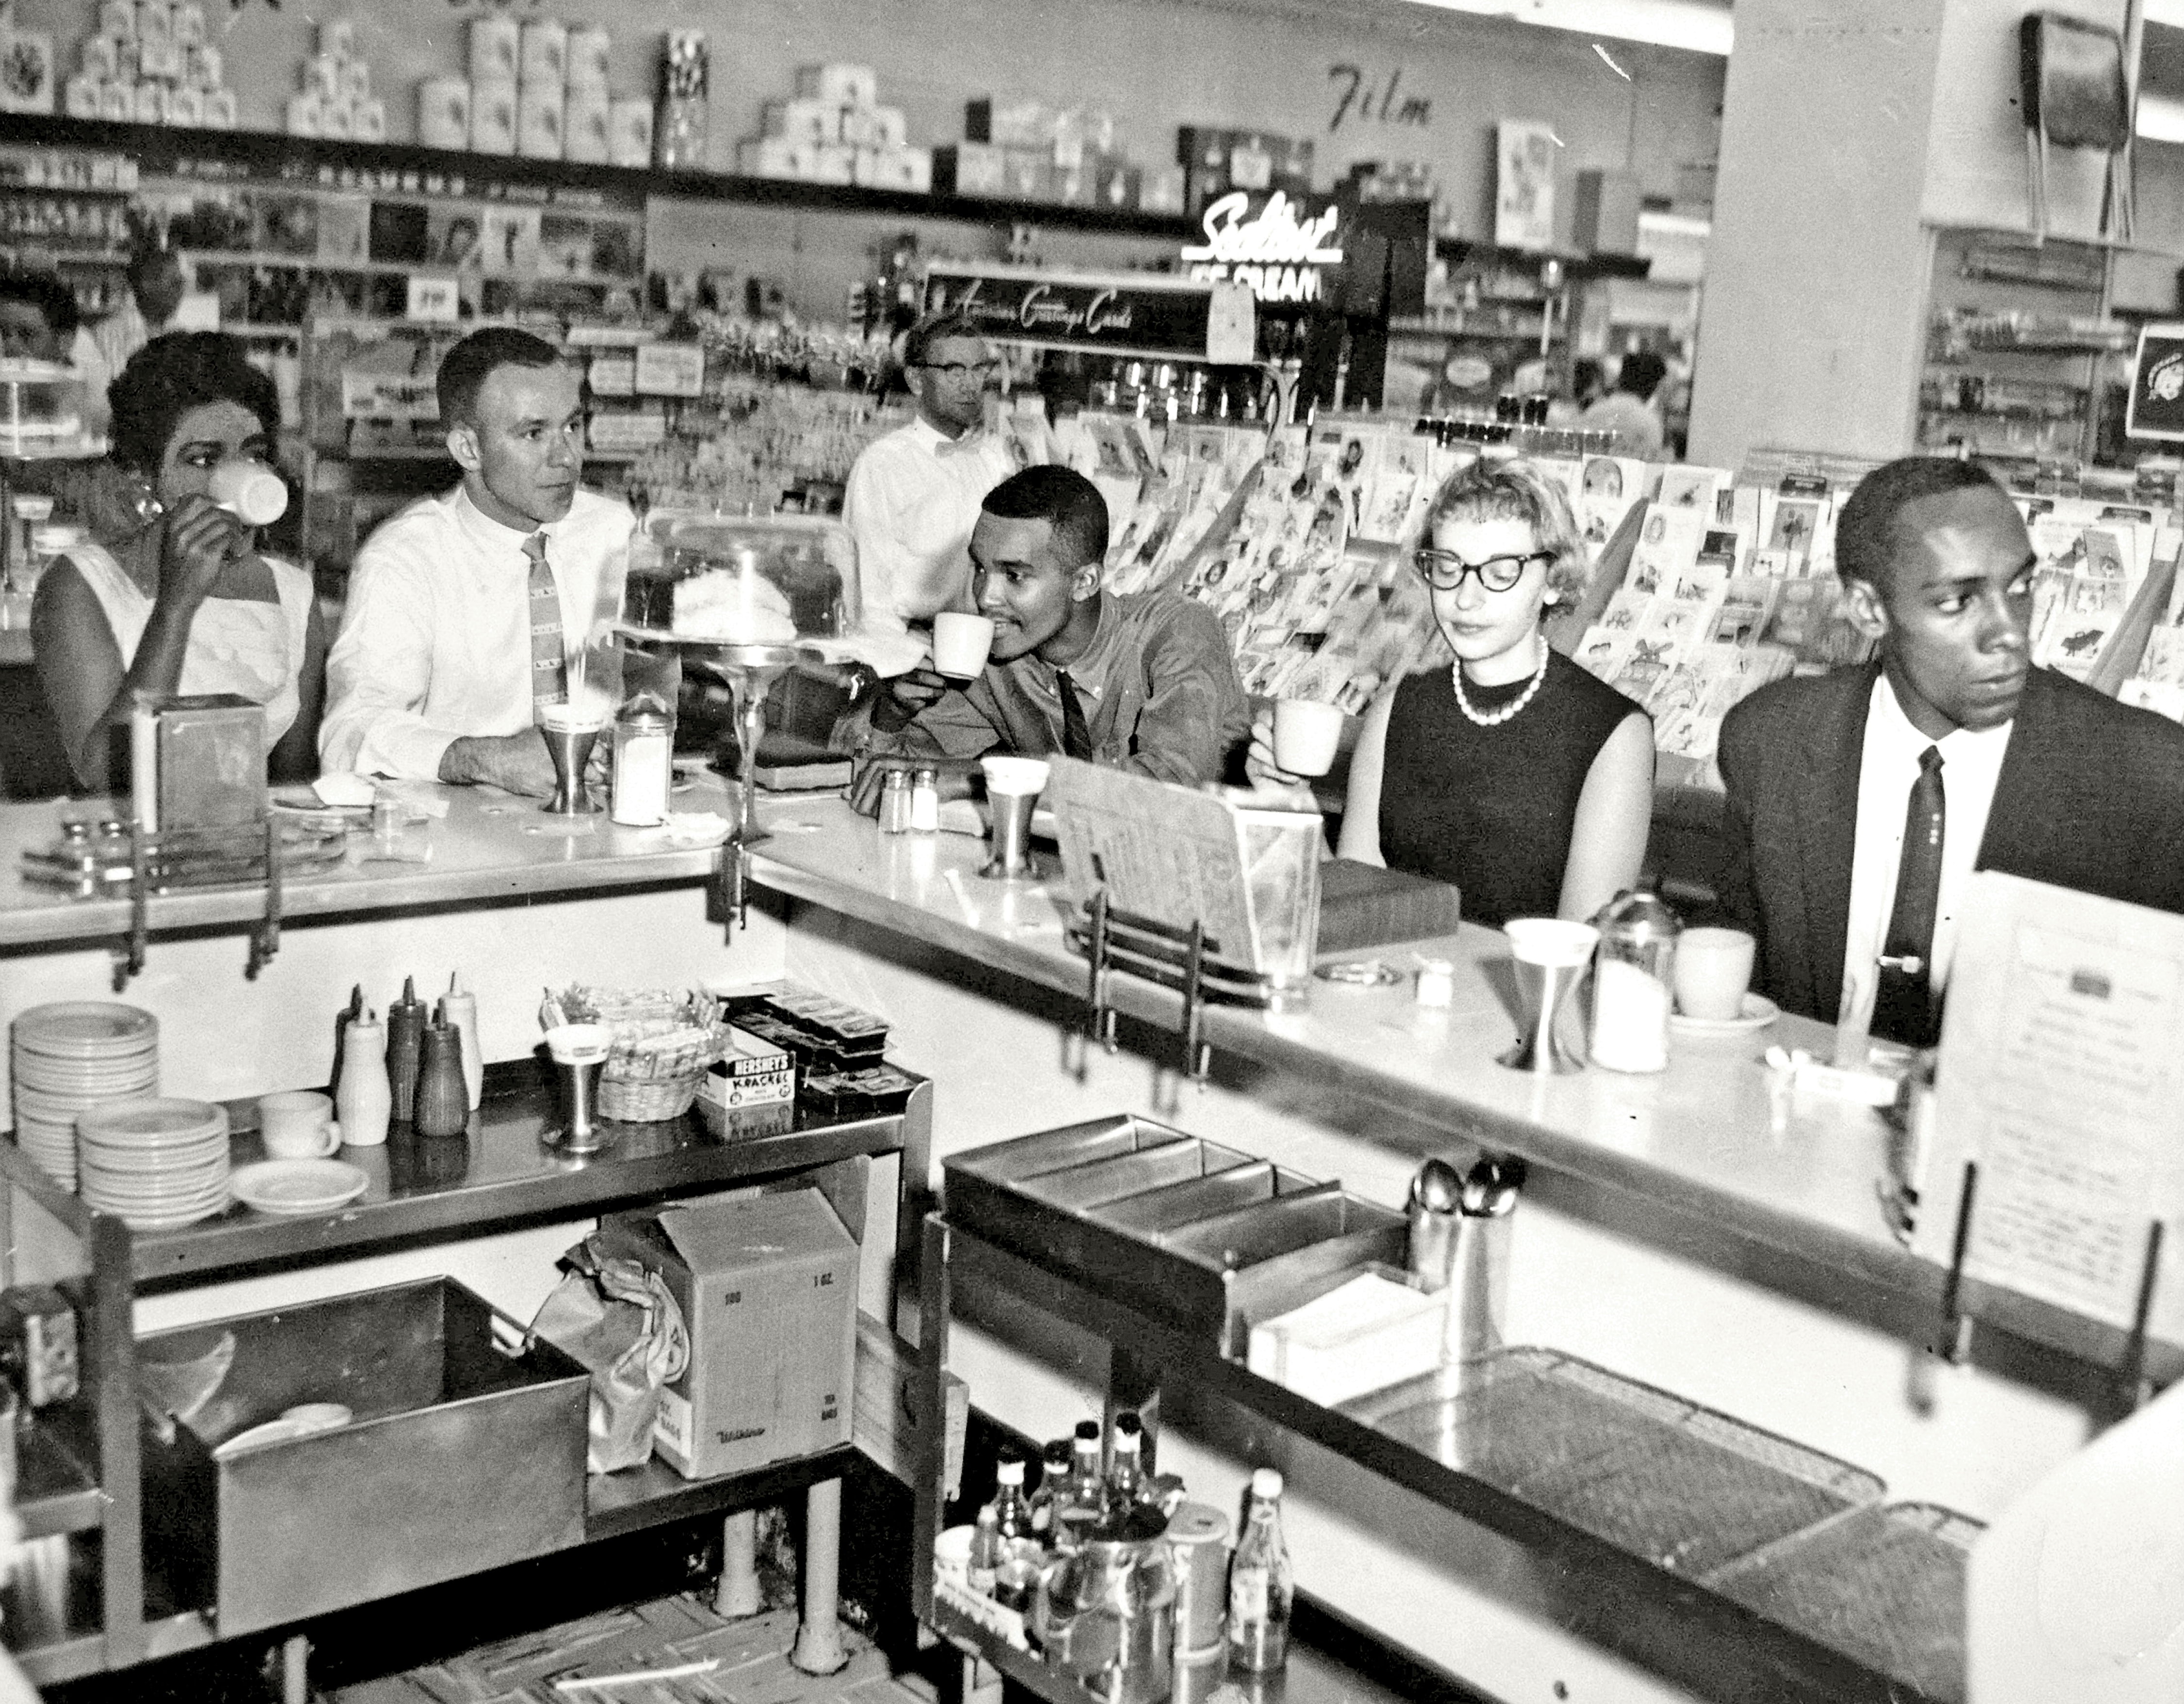 Dion Diamond at the Drug Fair at Glebe Road and Pershing Drive in Arlington, June 23, 1960. Reprinted with permission of the DC Public Library, Star Collection © Washington Post.